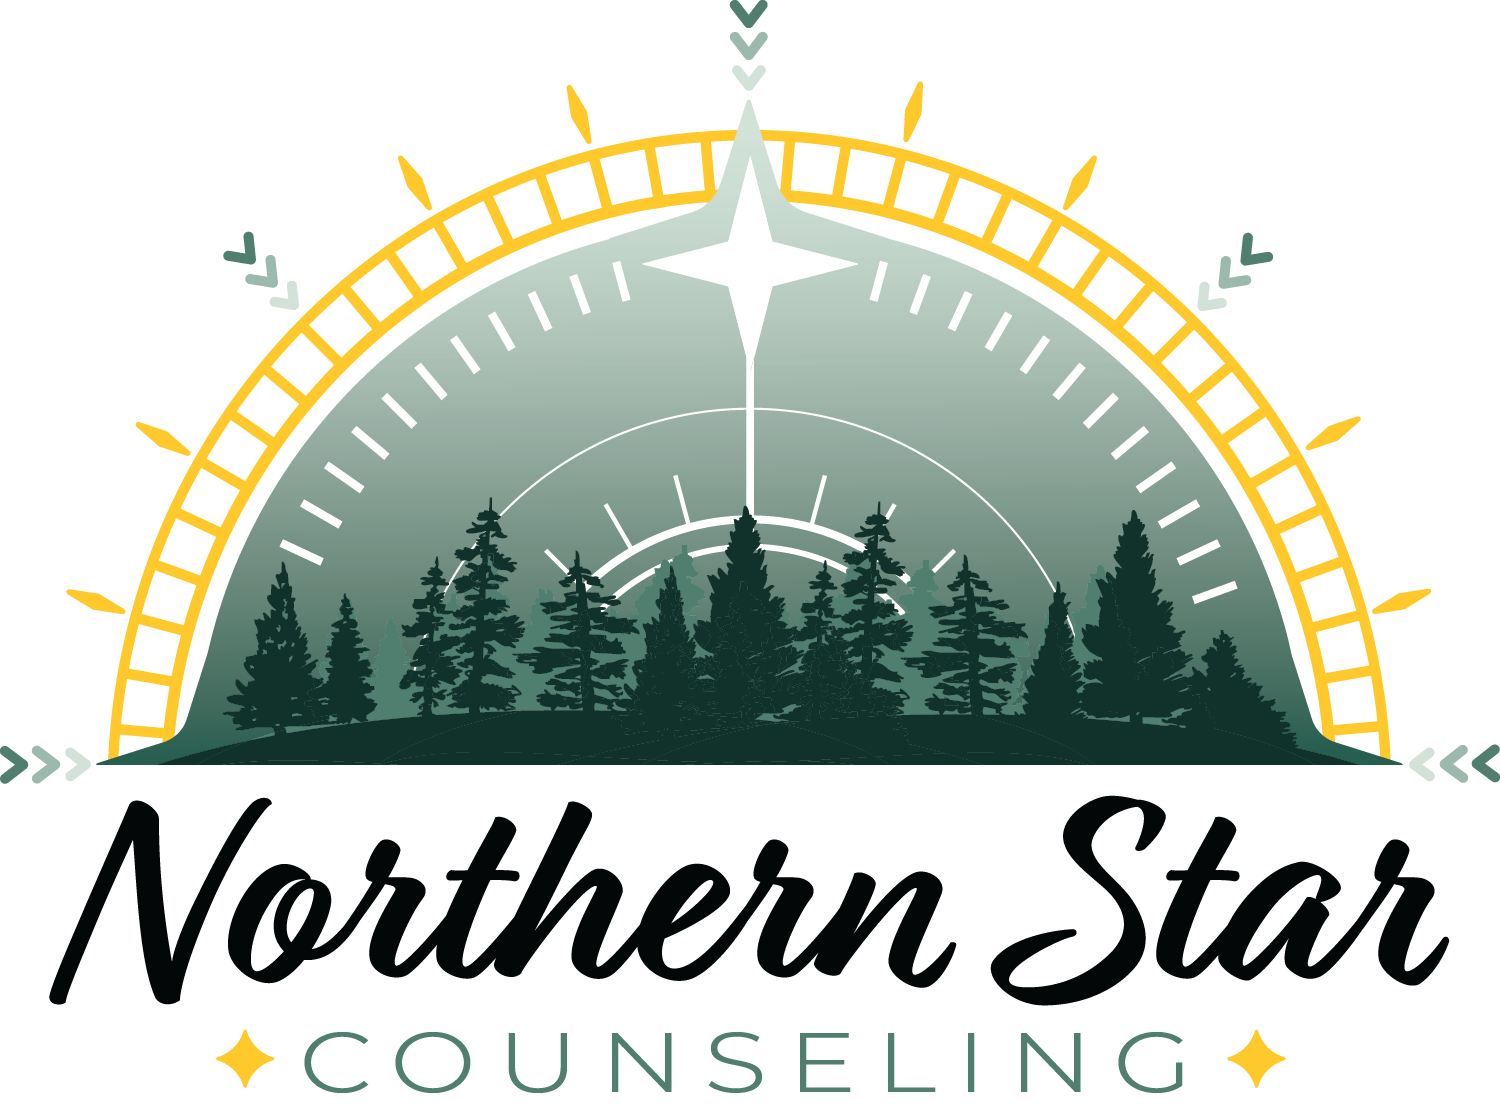 Northern Star Counseling